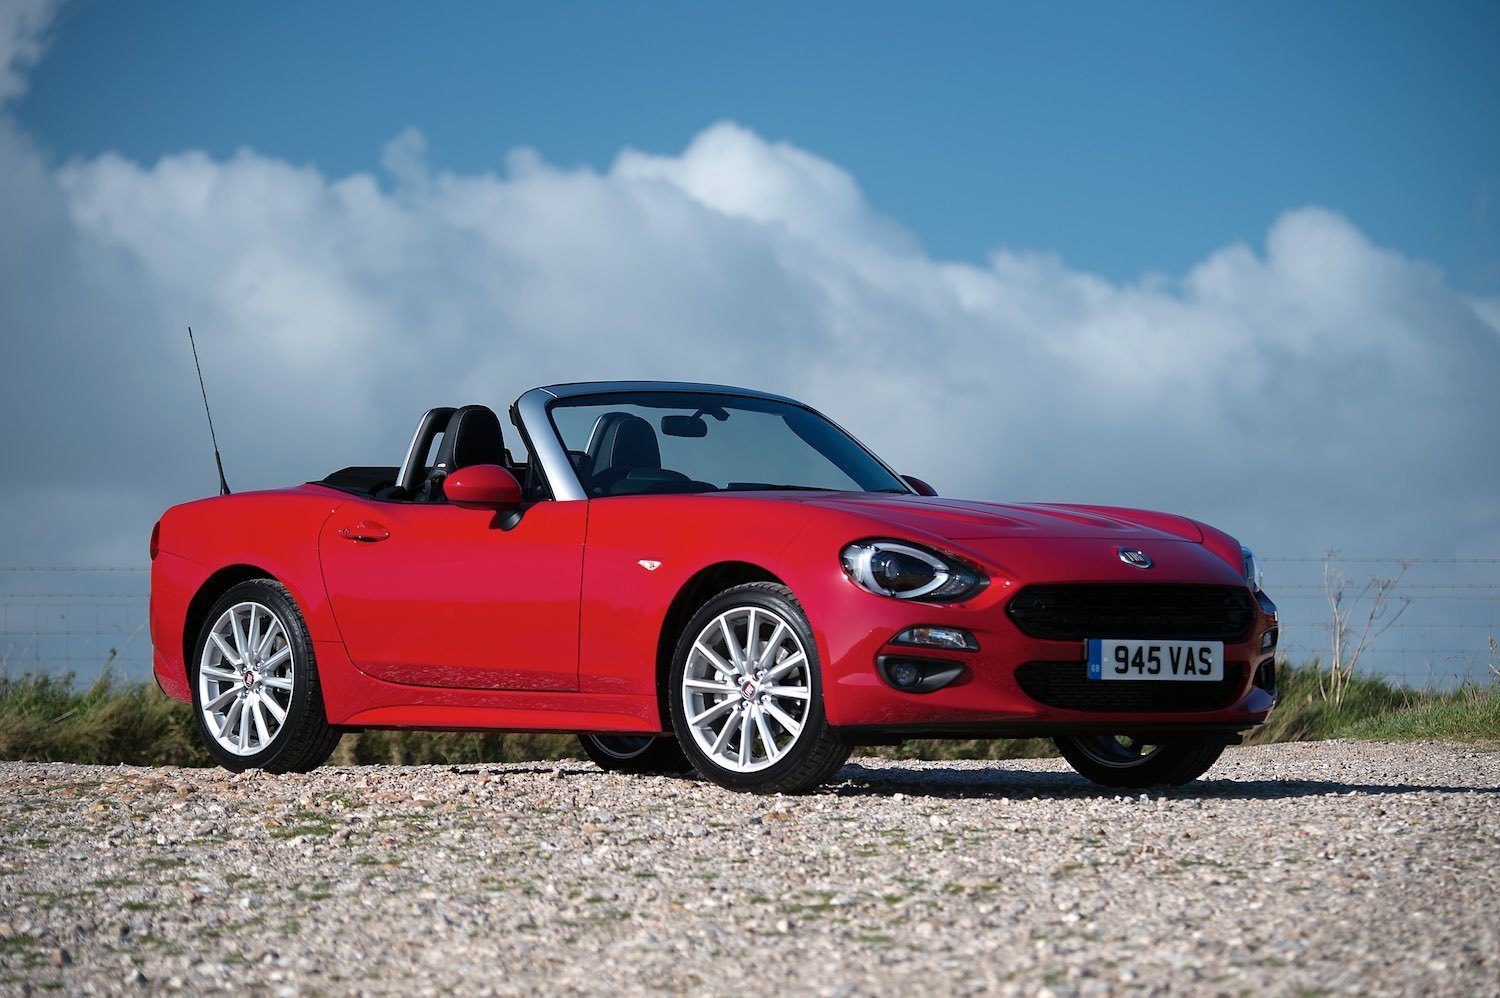 Tom Scanlan reviews the Fiat 124 Spider for Drive 9